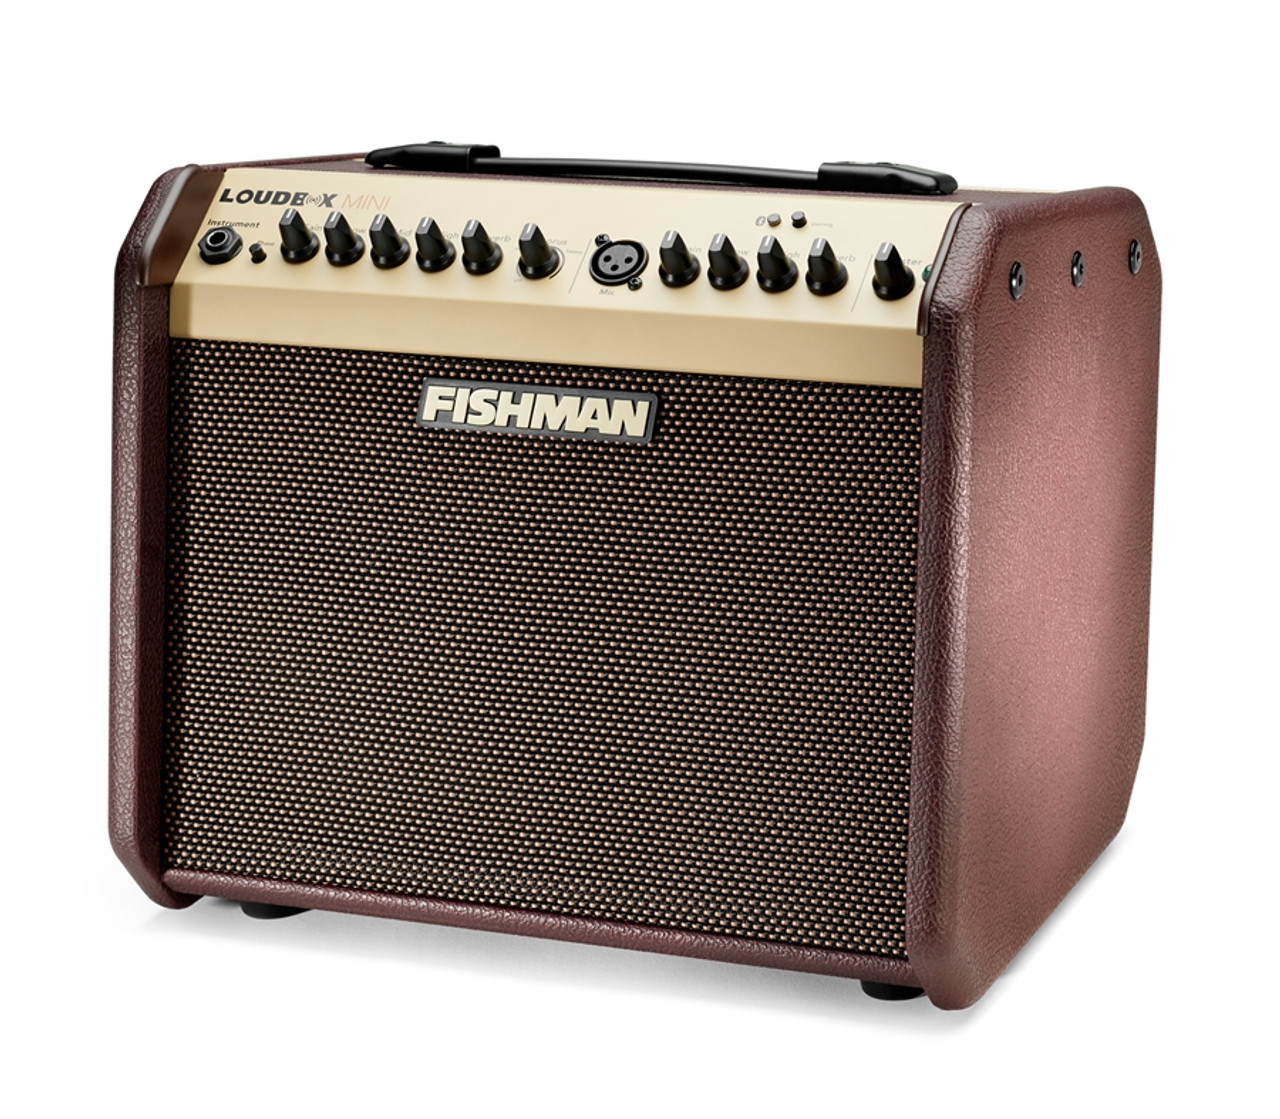 Fishman Loudbox Mini with Bluetooth Acoustic Amplifier